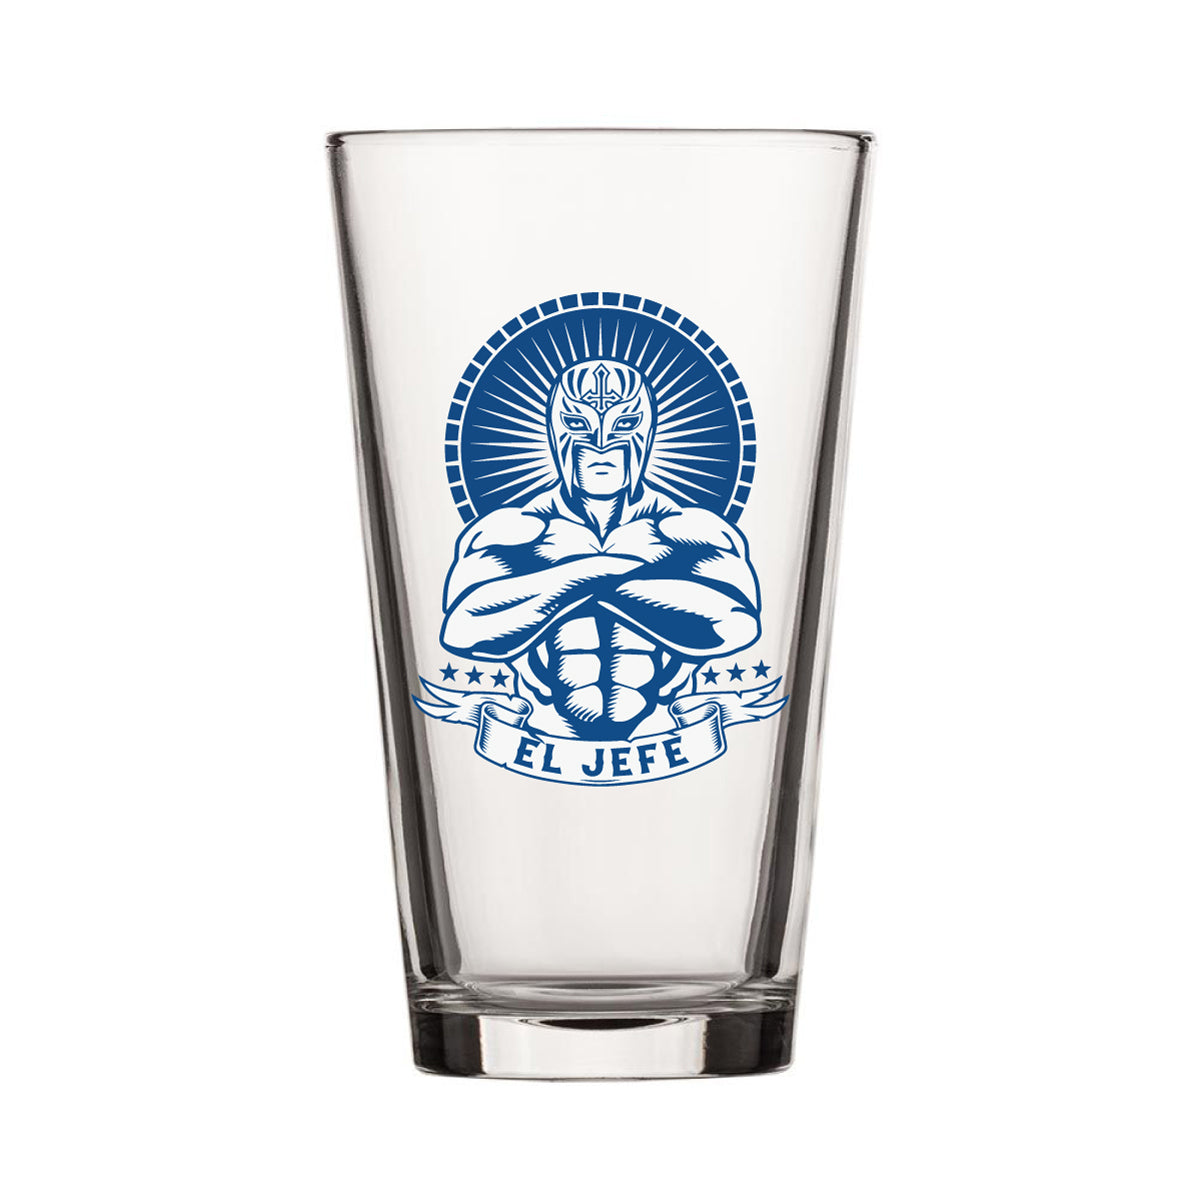 Clear pint glass featuring a blue & white shirtless luchador wrestler. Text underneath reads "El Jefe"